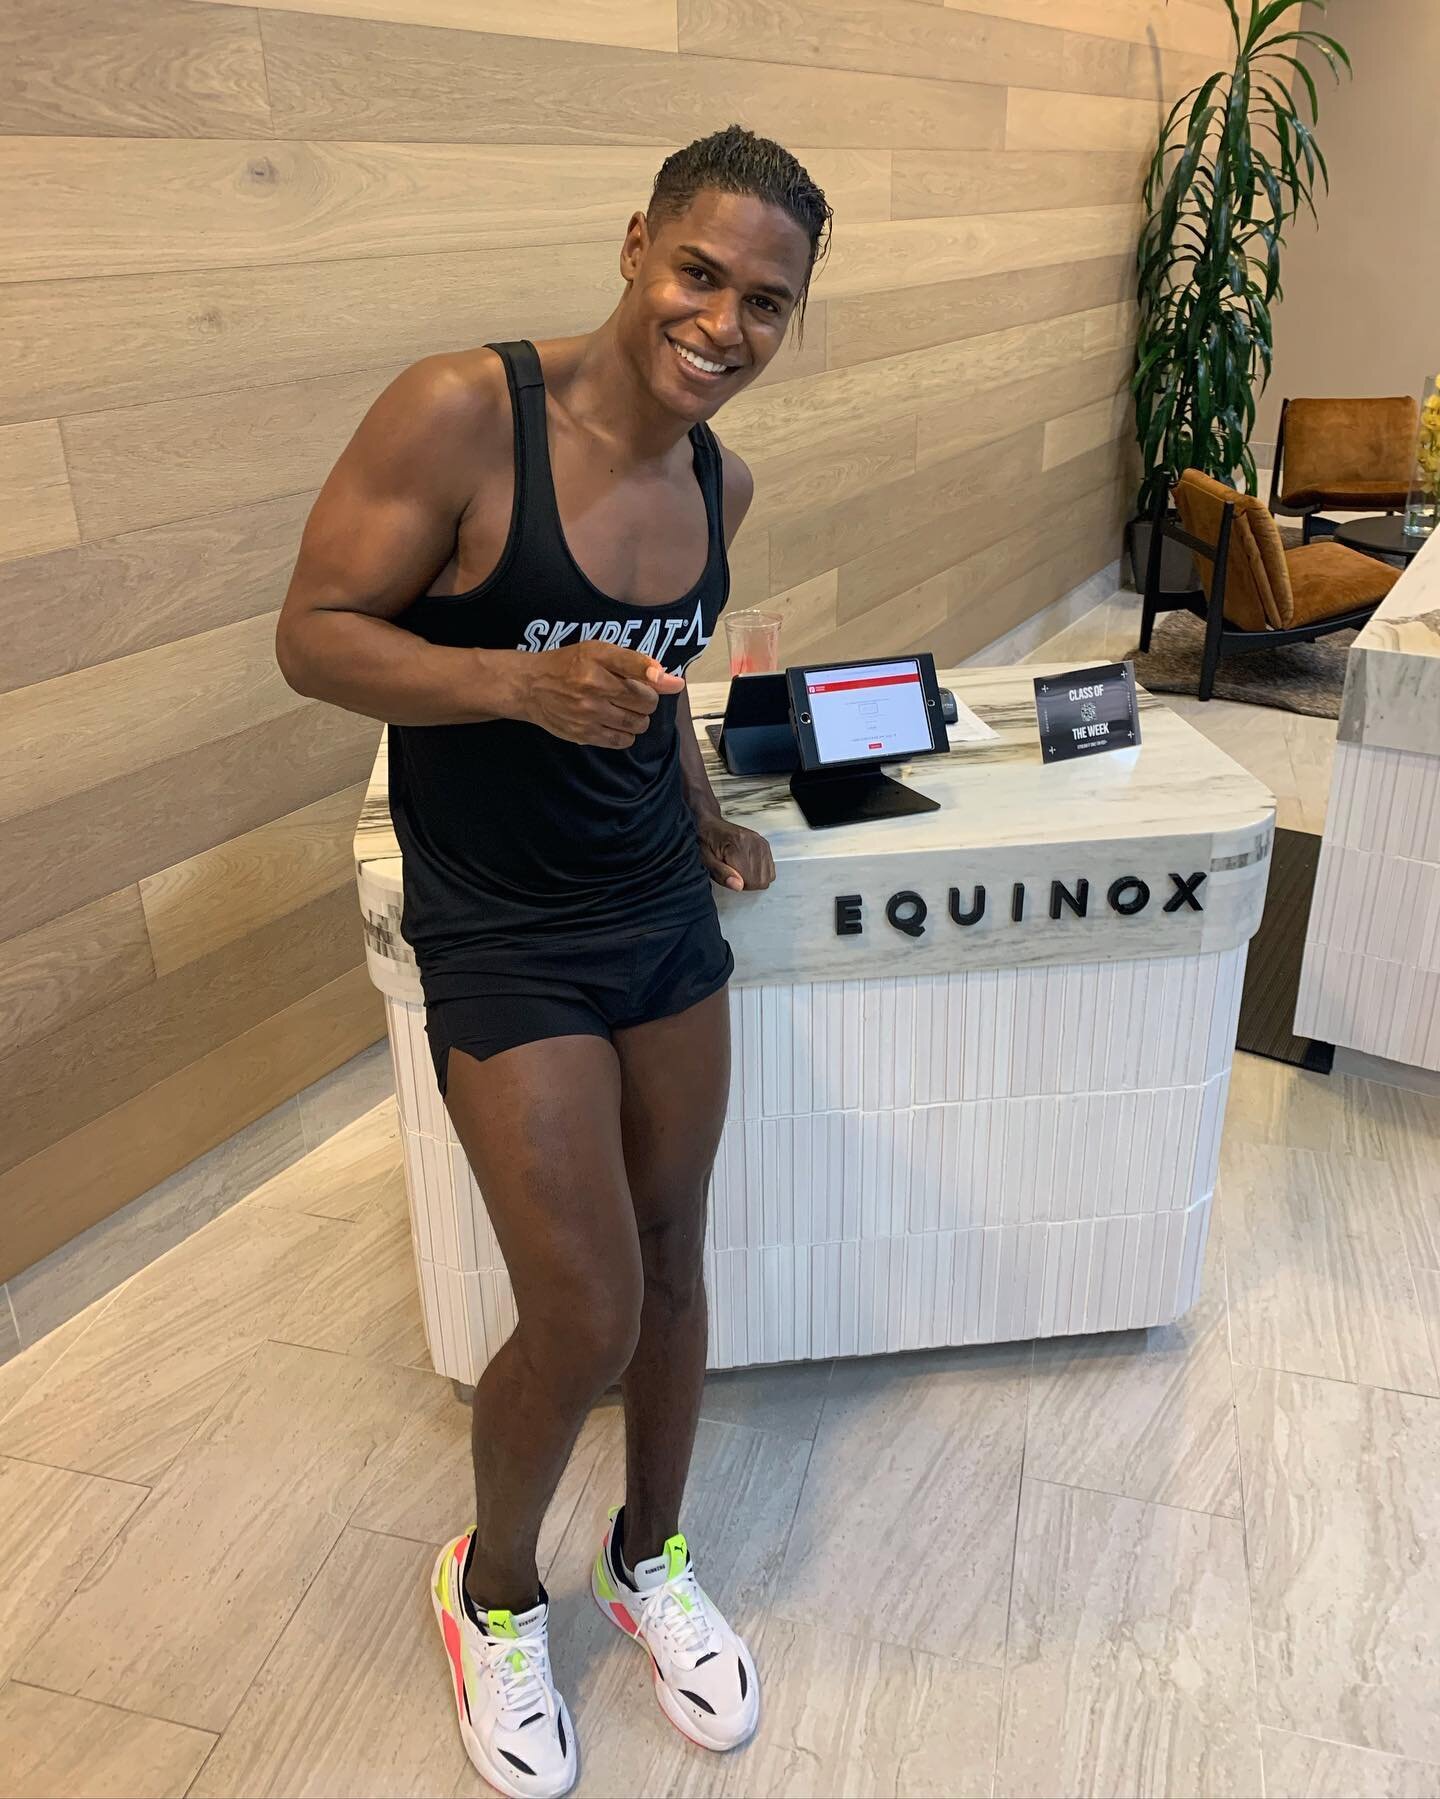 Catch a Skybeat Dance Fitness class @equinox 

#coralgables MONDAY 5pm &amp; TUESDAY 12:30pm

#brickell WEDNESDAY 6:45pm 

see you soon 

#skybeatdancefitness #equinox #miami #coralgables #merrickpark #fitness #wellness #shortshorts #fun #community #